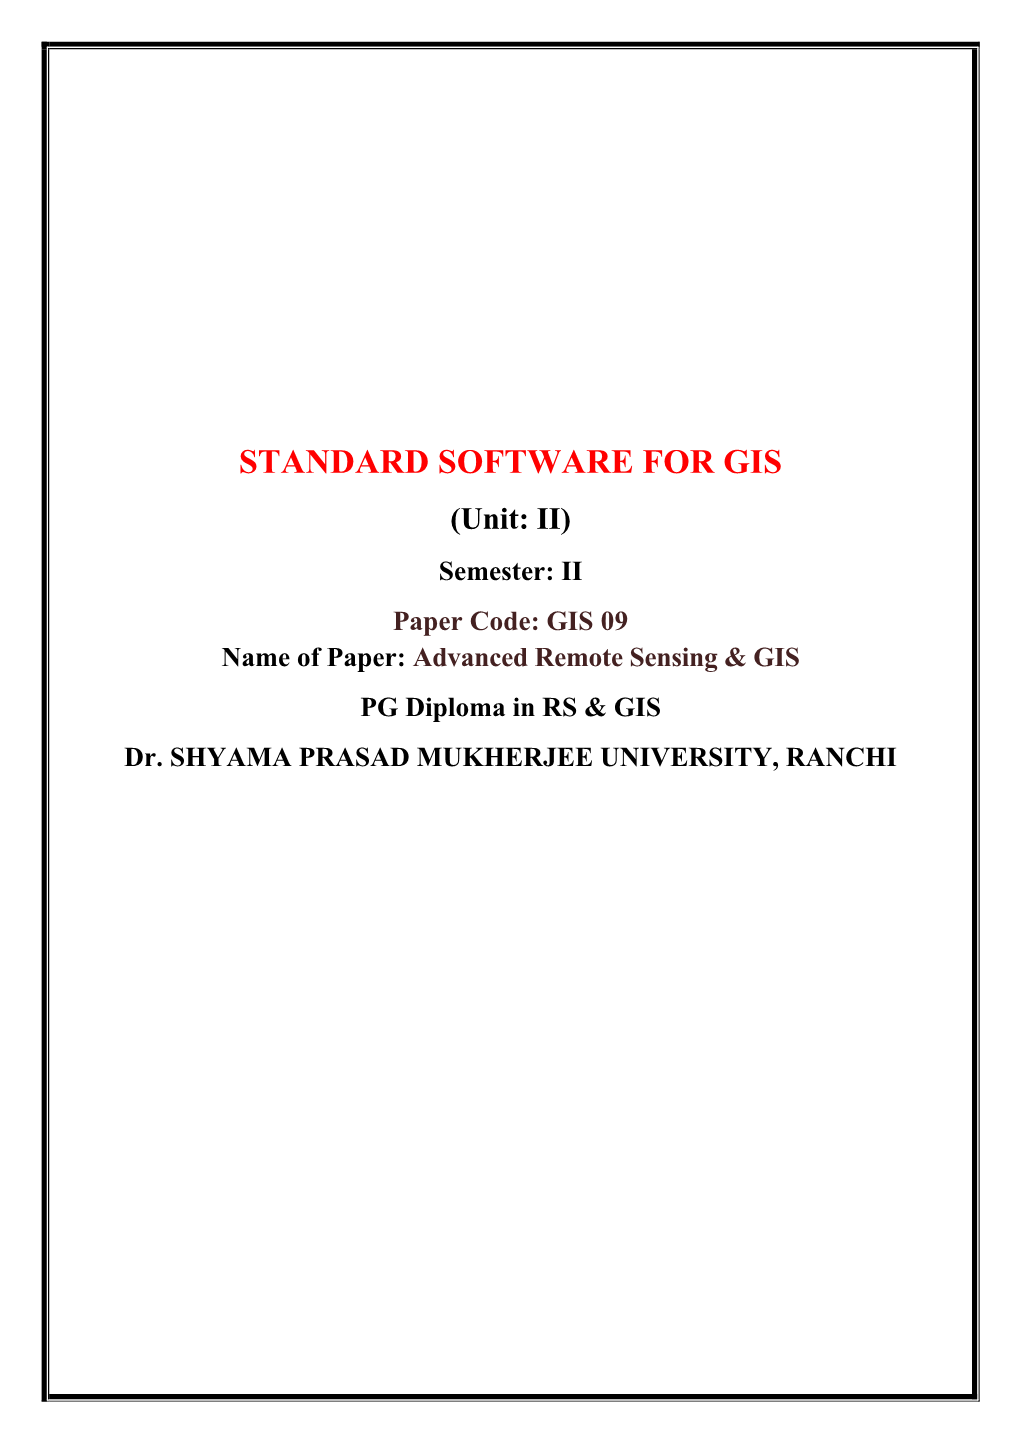 STANDARD SOFTWARE for GIS (Unit: II) Semester: II Paper Code: GIS 09 Name of Paper: Advanced Remote Sensing & GIS PG Diploma in RS & GIS Dr